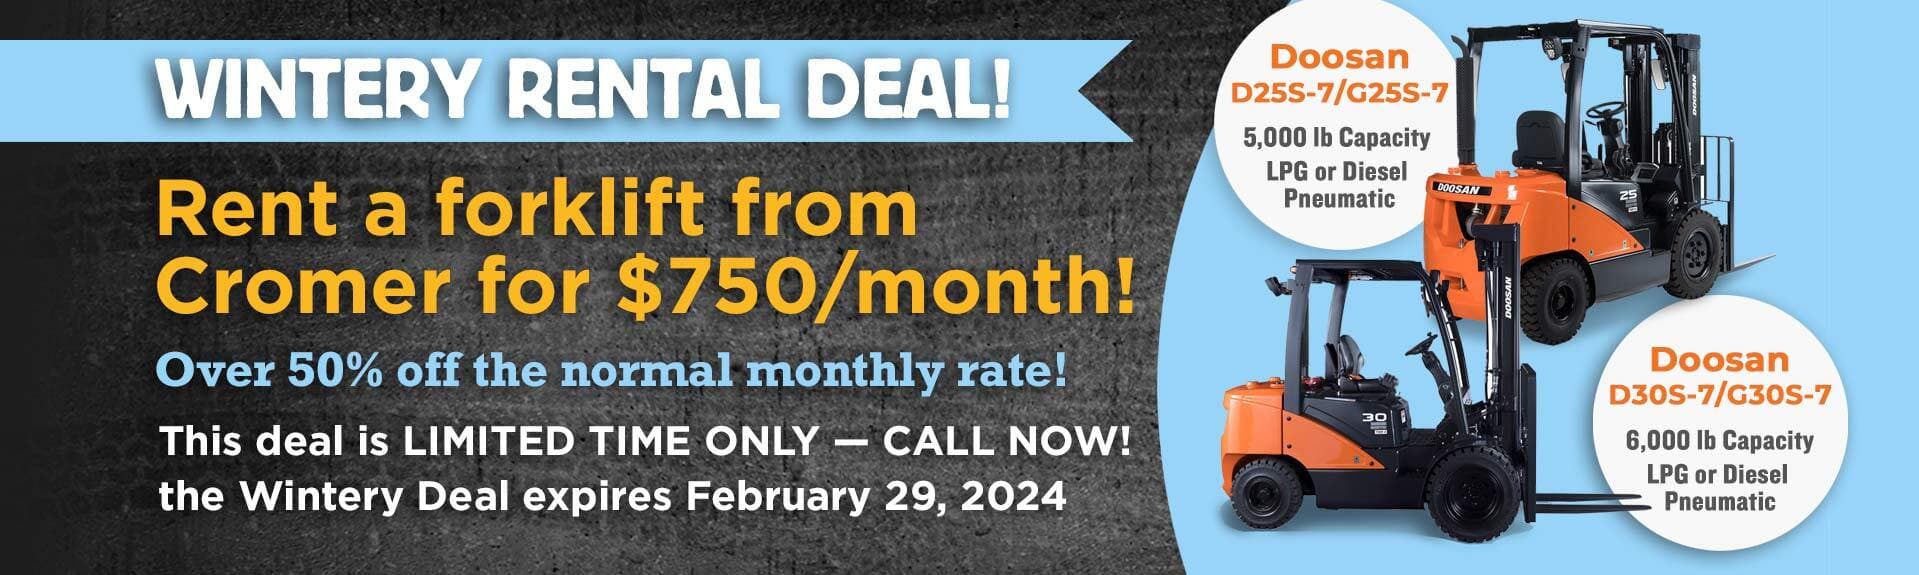 Rent a Doosan forklift from Cromer before February 29, 2024, for only $750/month!